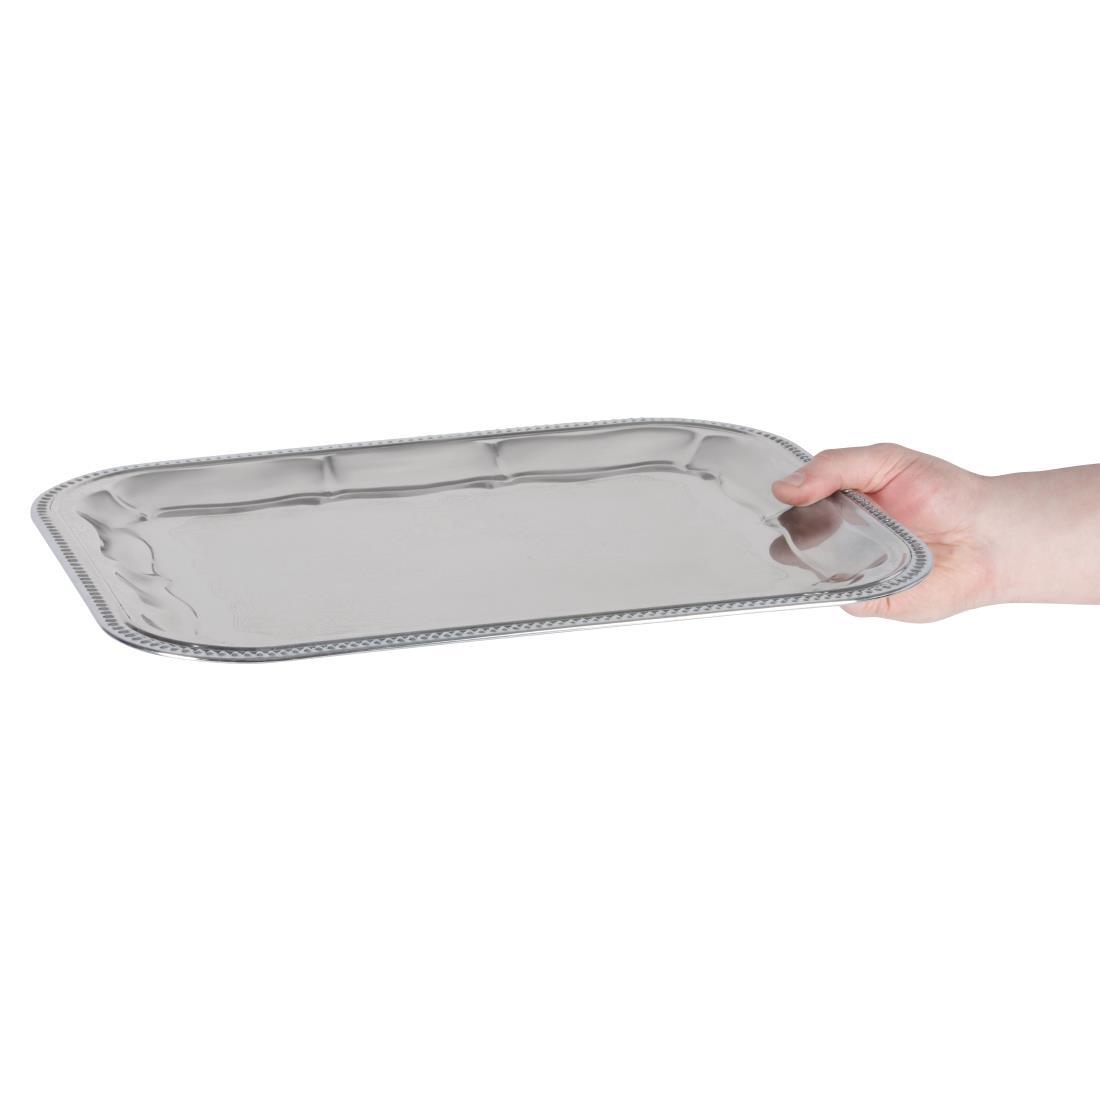 APS Semi-Disposable Party Tray 410 x 310mm Chrome - T751  - 4